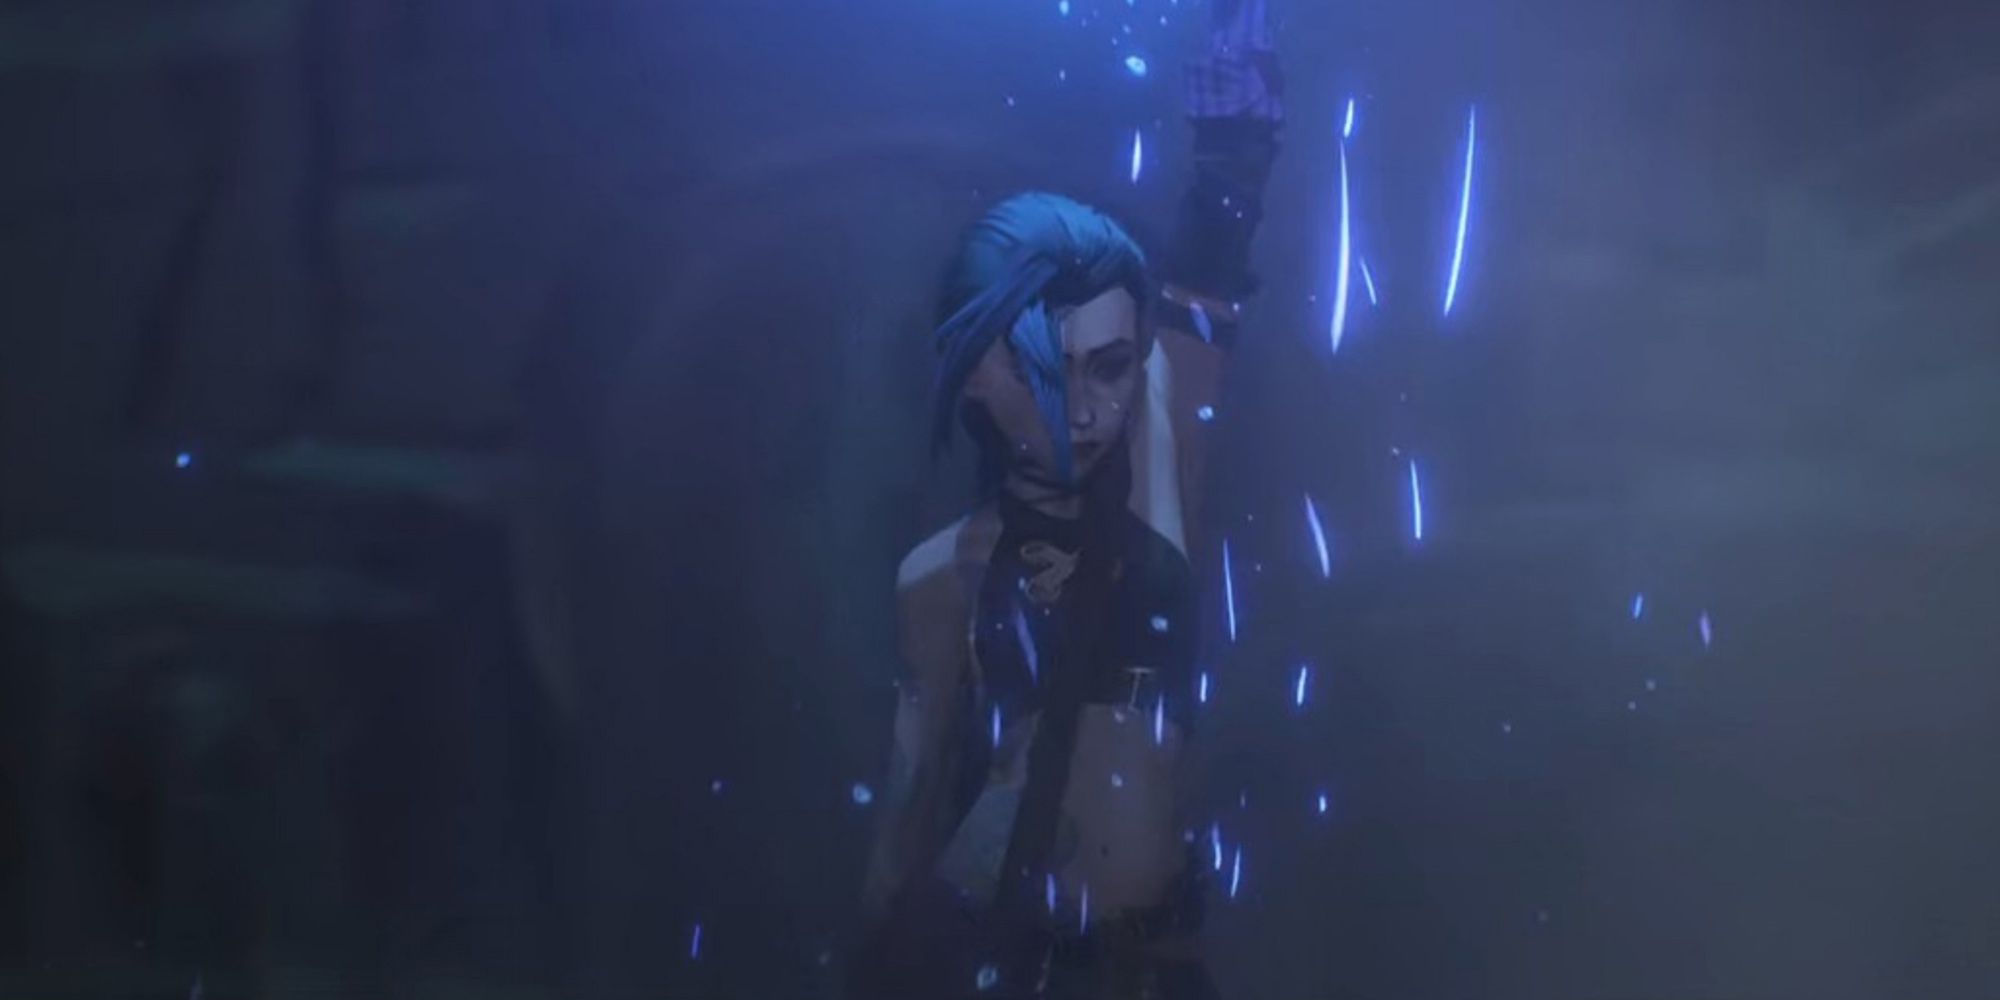 Arcane - Jinx Holding Up A Flare With The Camera Rotating Around Her Like A Real Camera